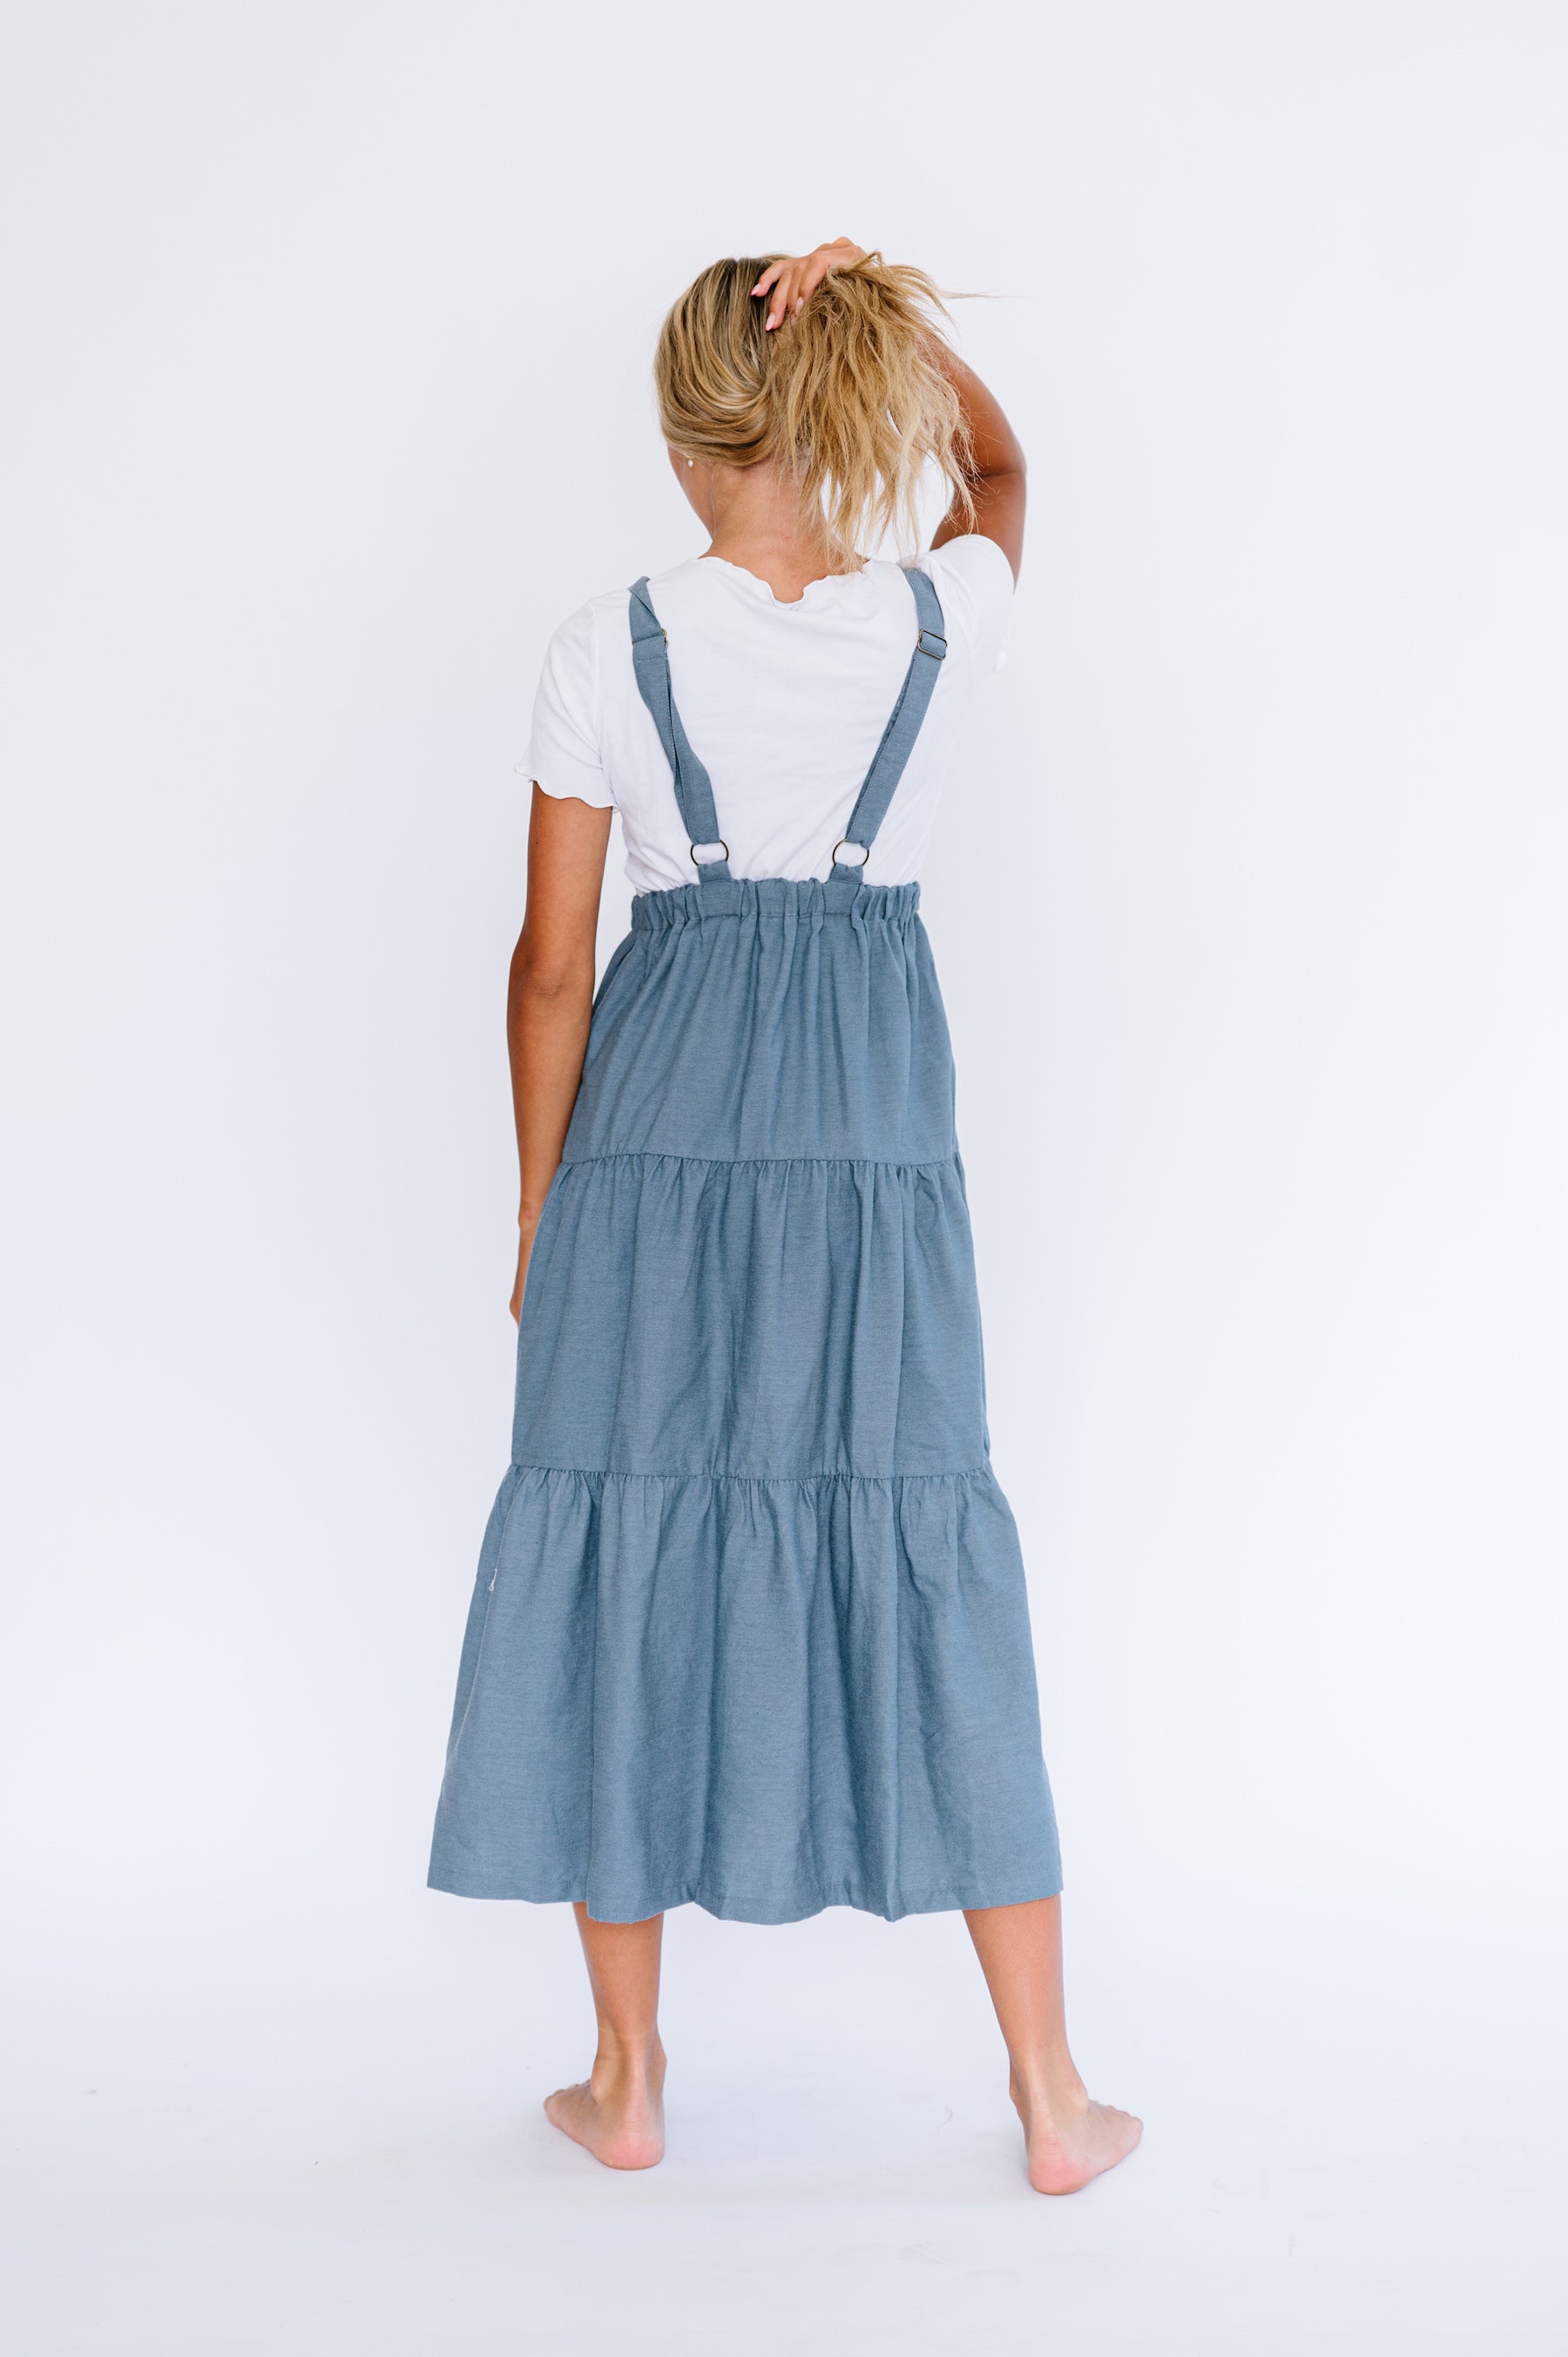 Womens Loose Fitting A Line Style Cotton Denim Overalls With Pockets,  Womans Casual Overalls, Loose Overalls, Long Dress, Overalls for Lady -  Etsy | Denim overall dress, Long denim dress, Denim women